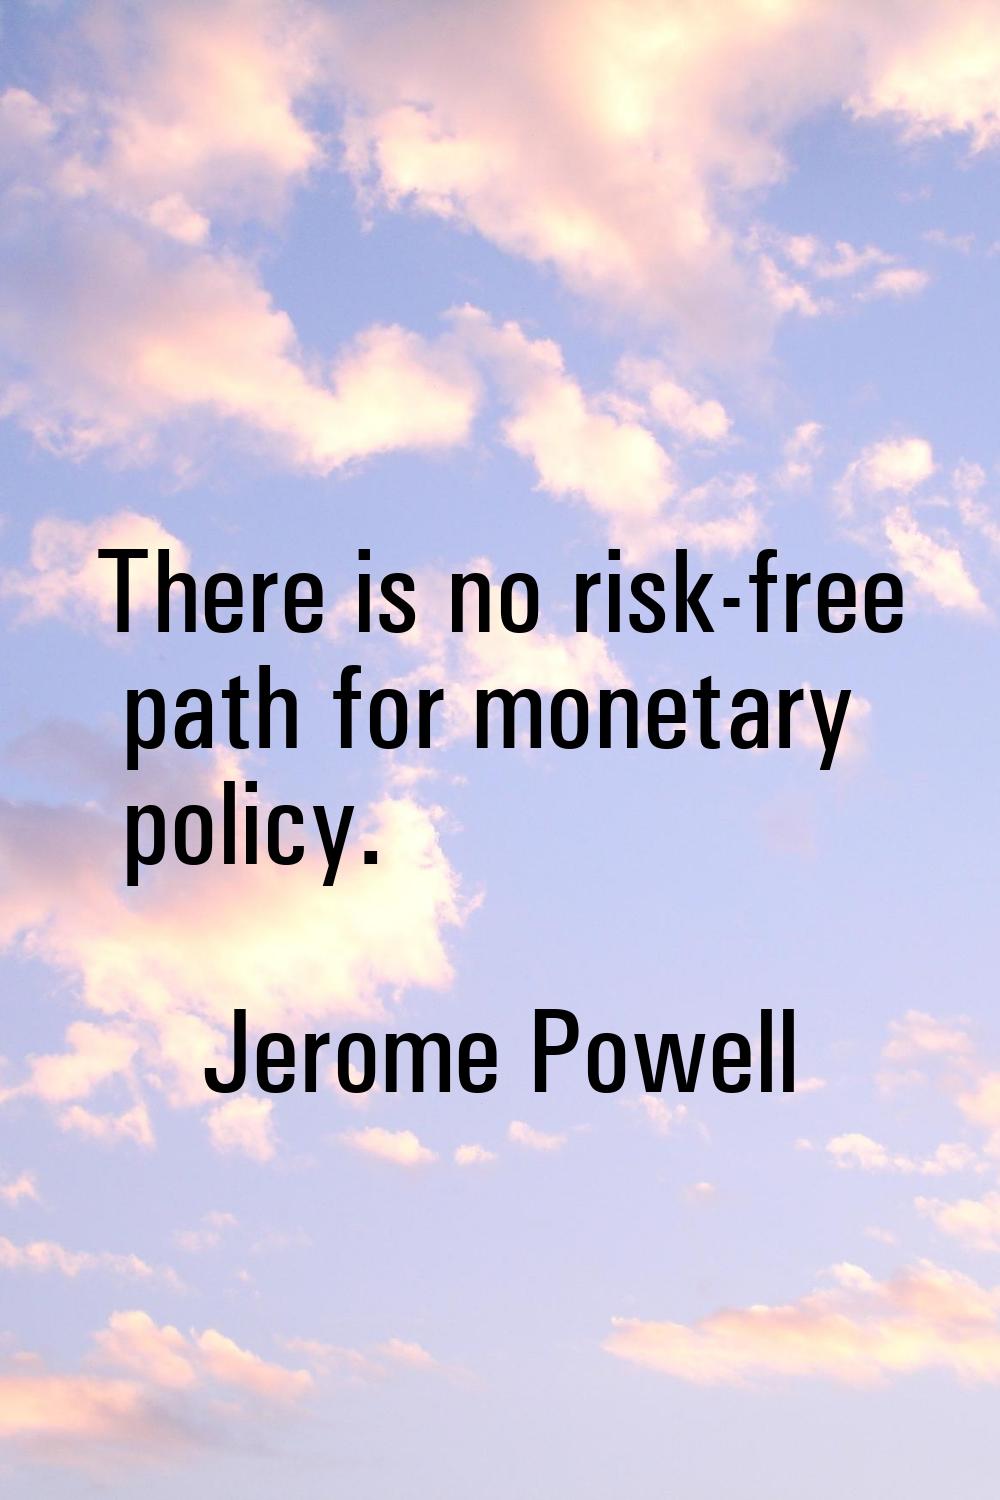 There is no risk-free path for monetary policy.